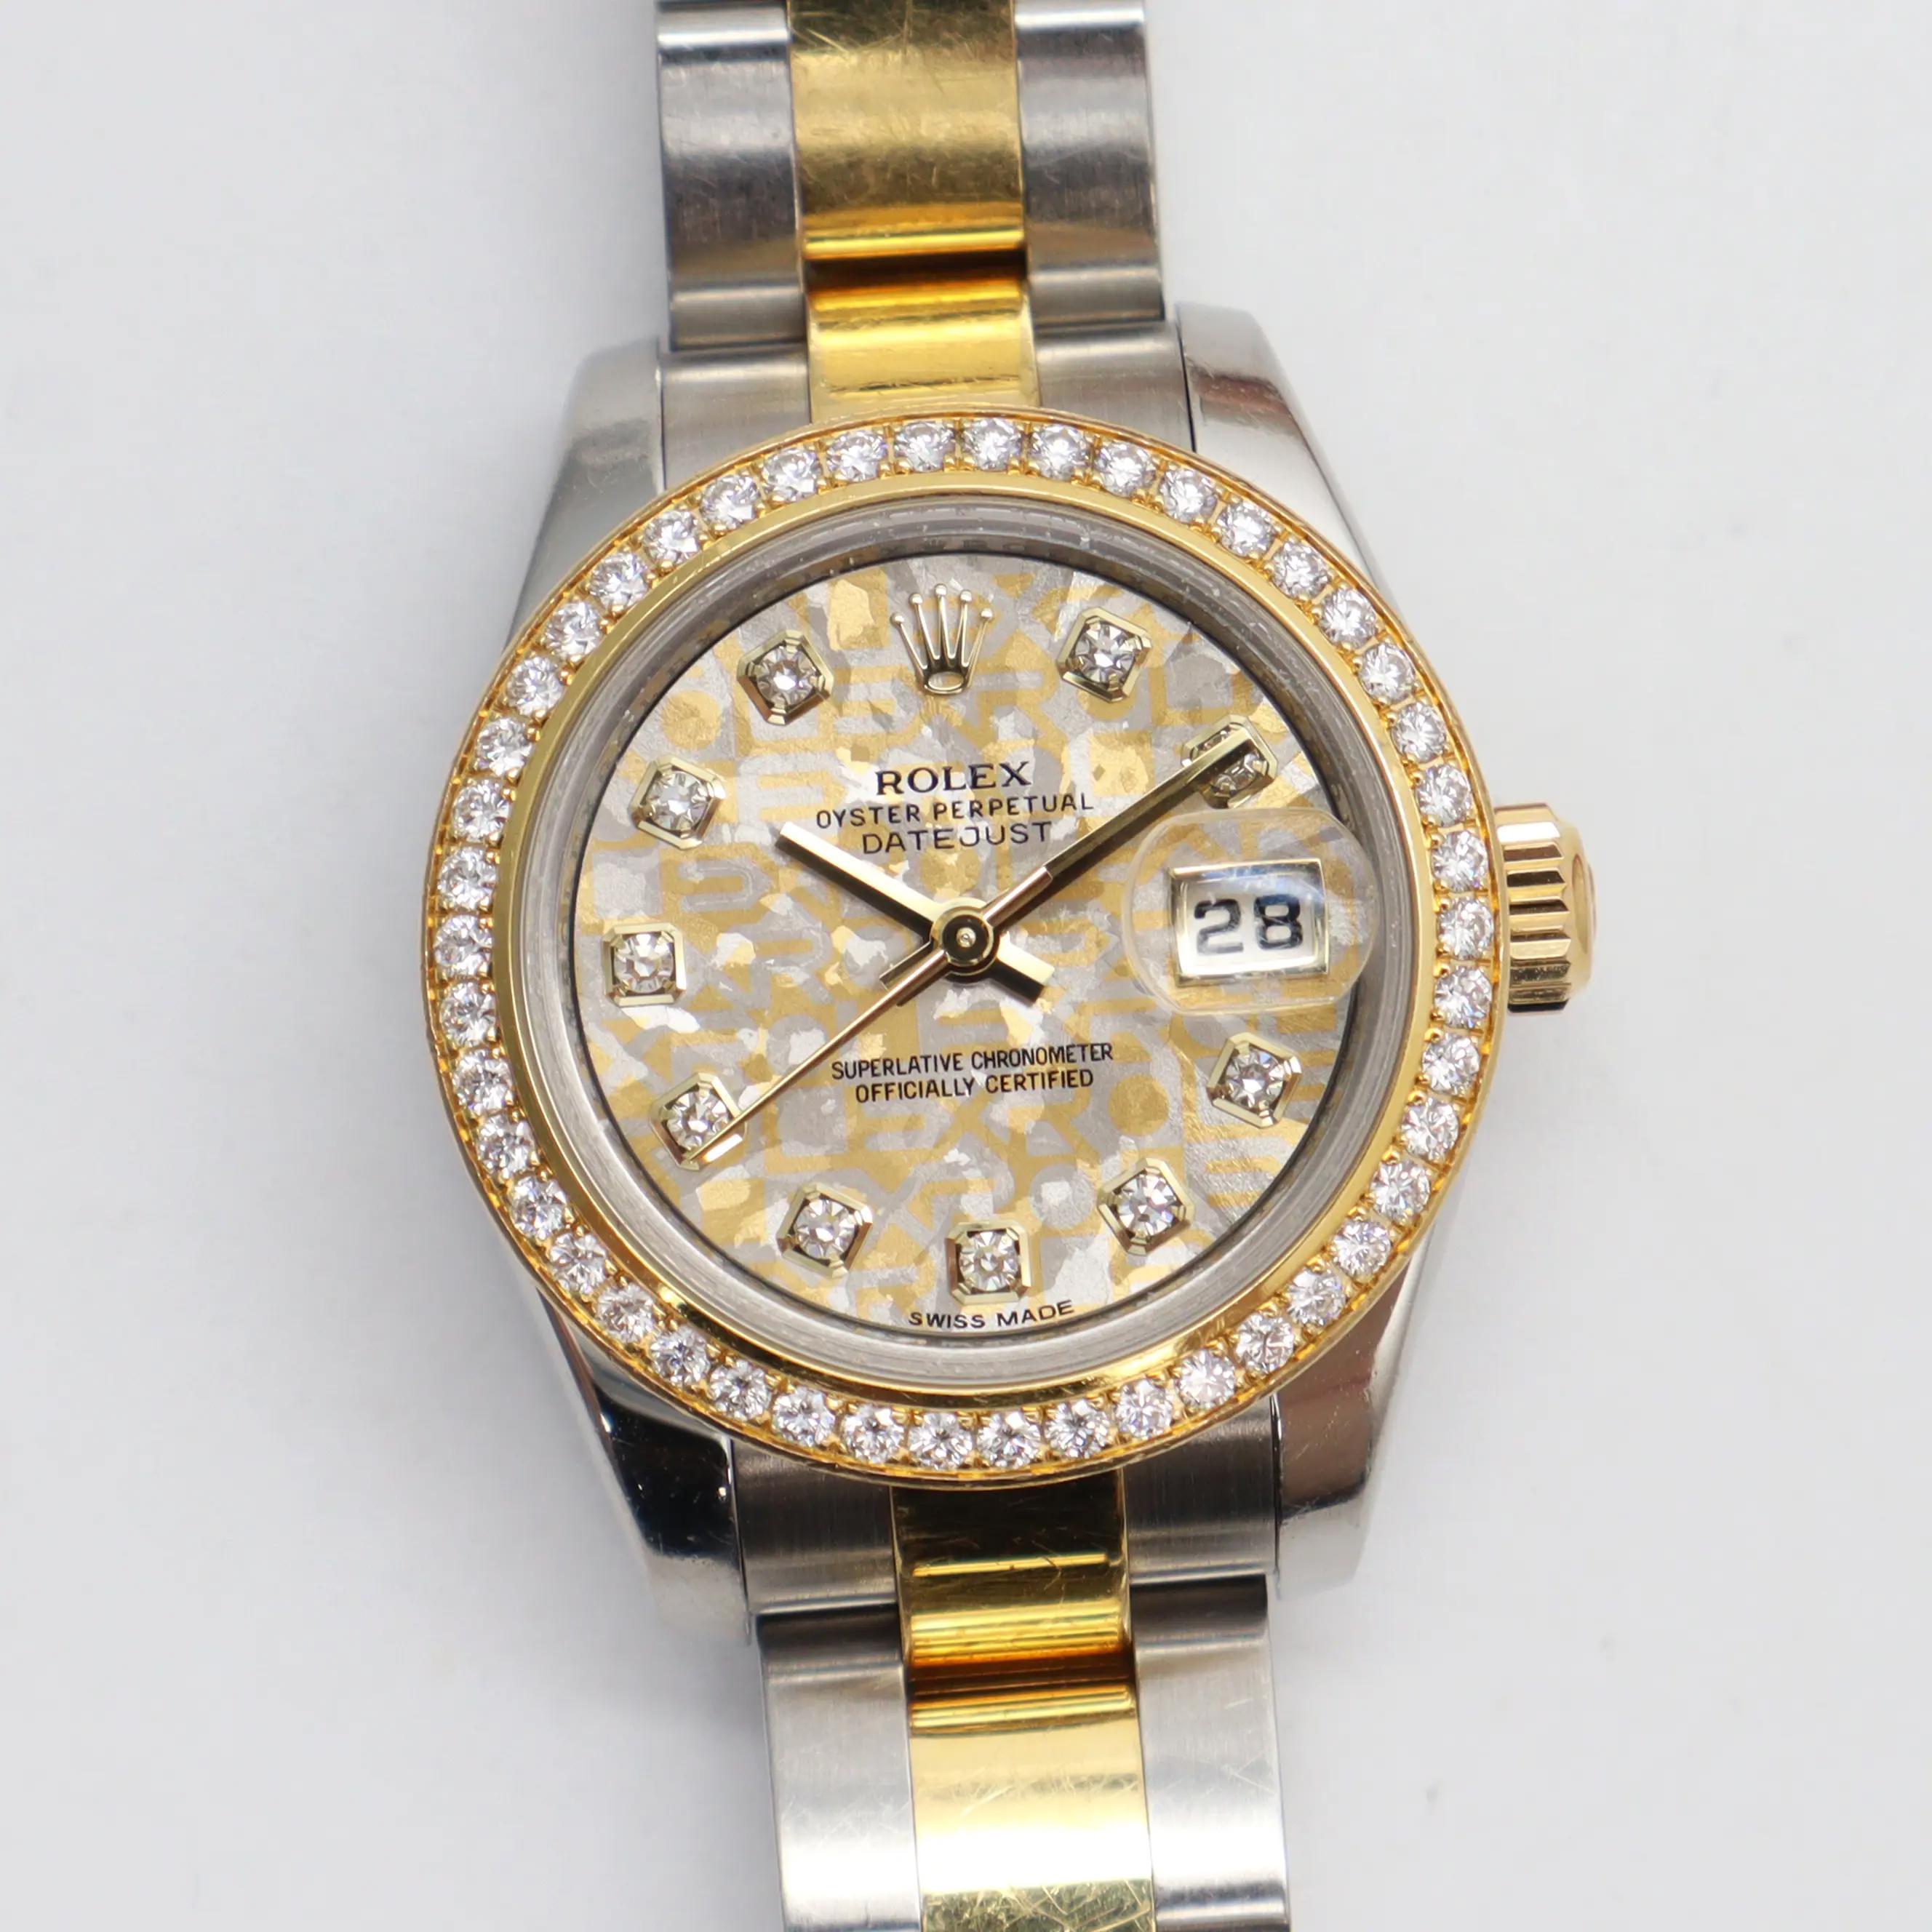 Rare Rolex Lady-Datejust 26 18k Gold Steel Crystal Flake Diamond Dial 179383 For Sale 4